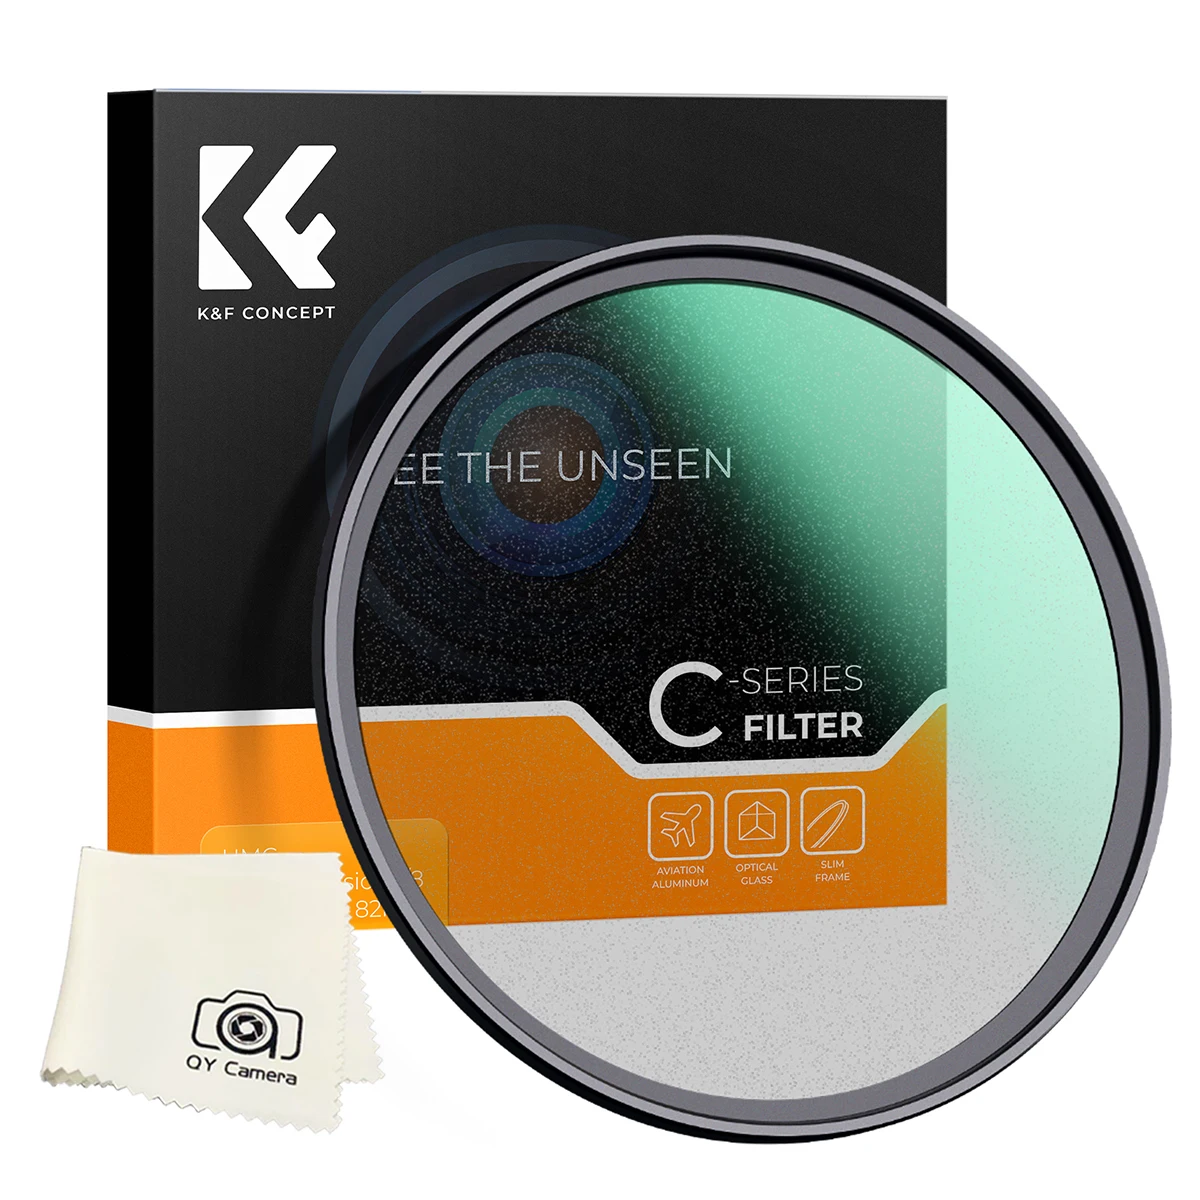 

K&F Concept Lens Diffusion Filter 49mm 1/8 Black Pro Mist Antireflective Coating Sony 50mm f/1.8 E C Series